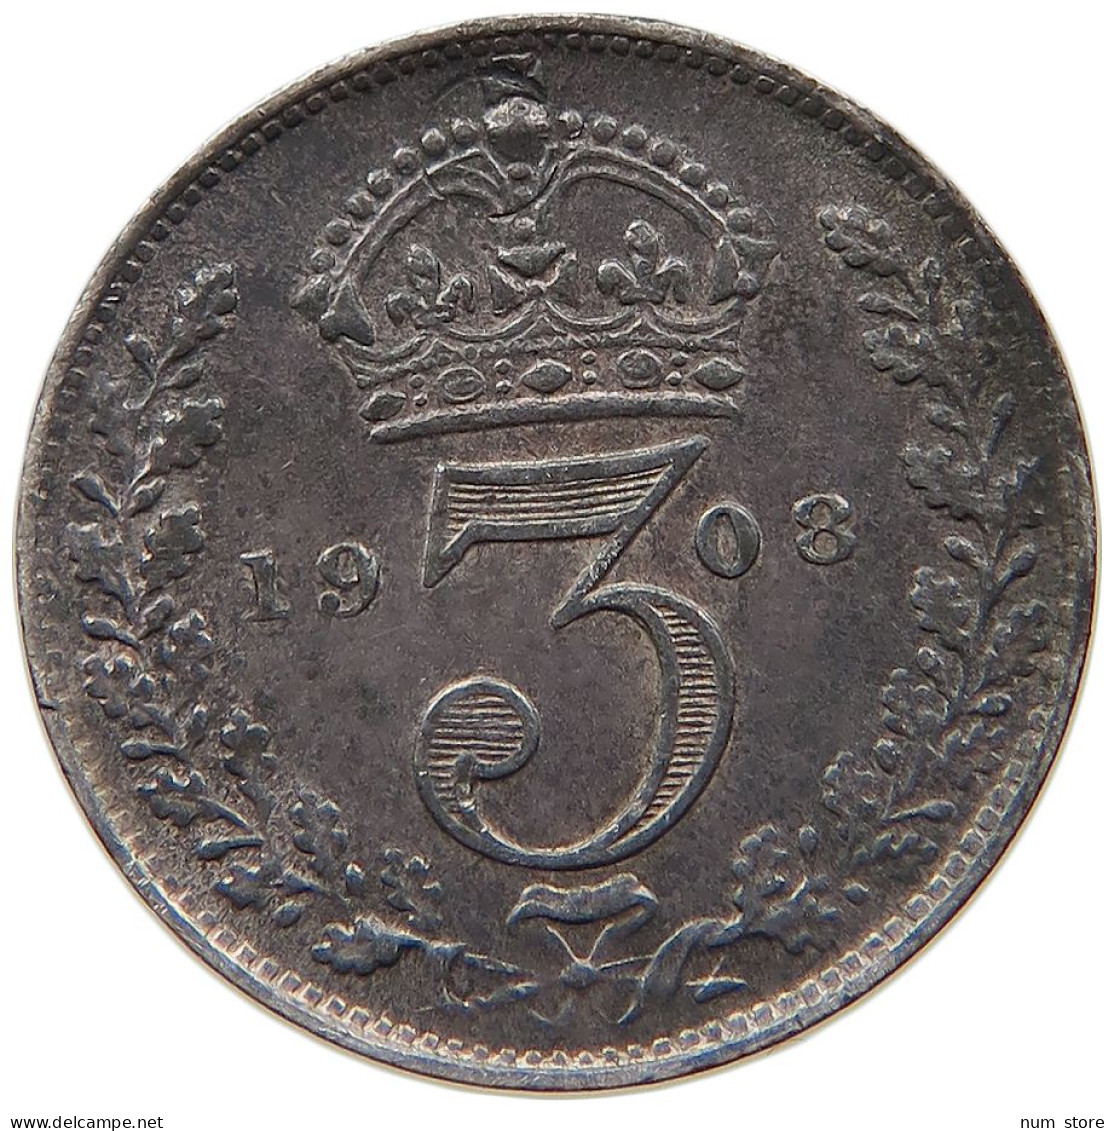 GREAT BRITAIN THREEPENCE 1908 Edward VII., 1901 - 1910 #s008 0277 - F. 3 Pence